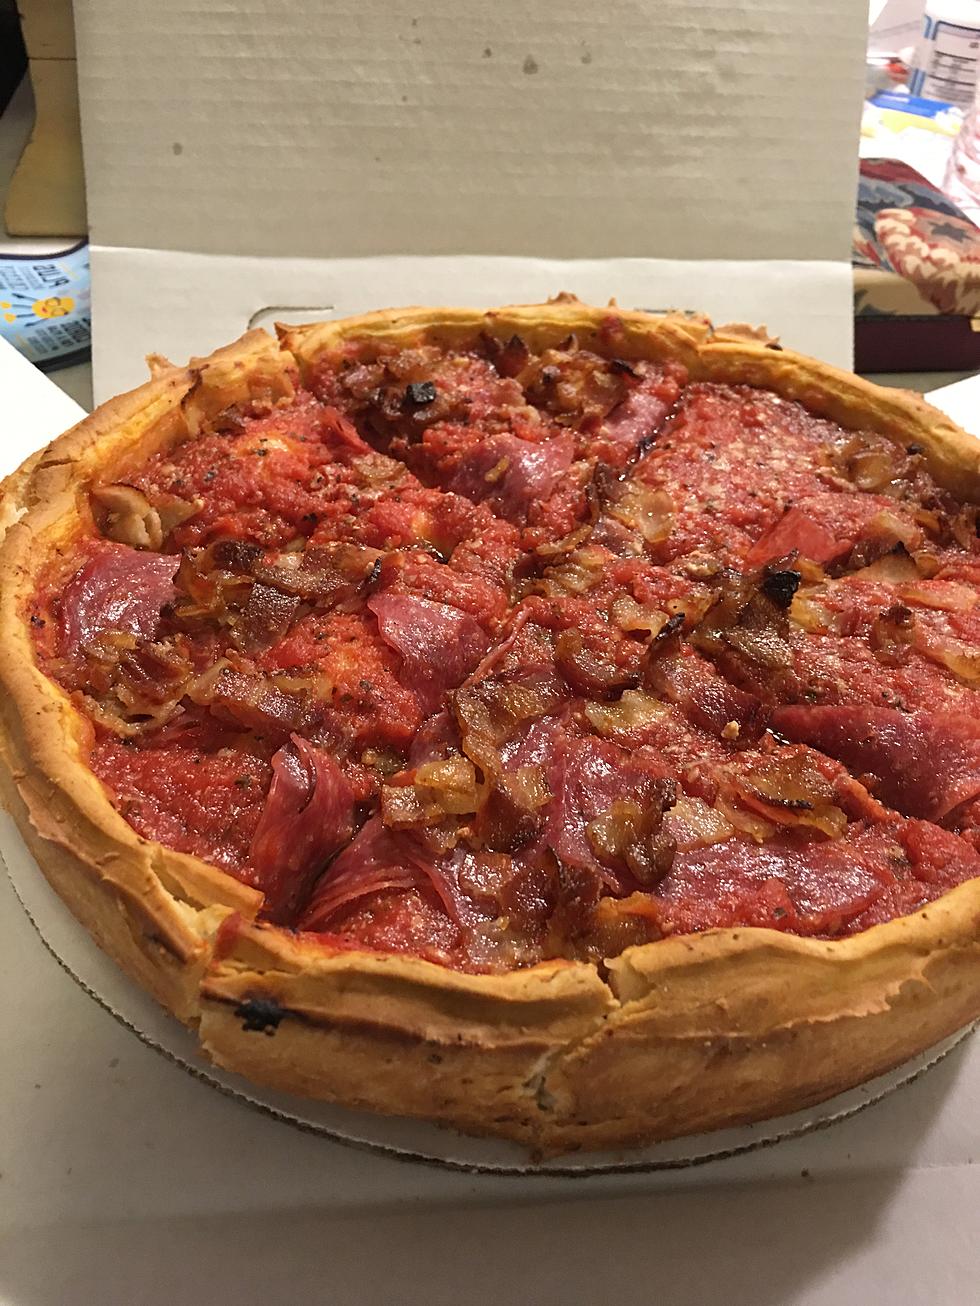 So, Who really Created The Deep Dish Pizza in Illinois?